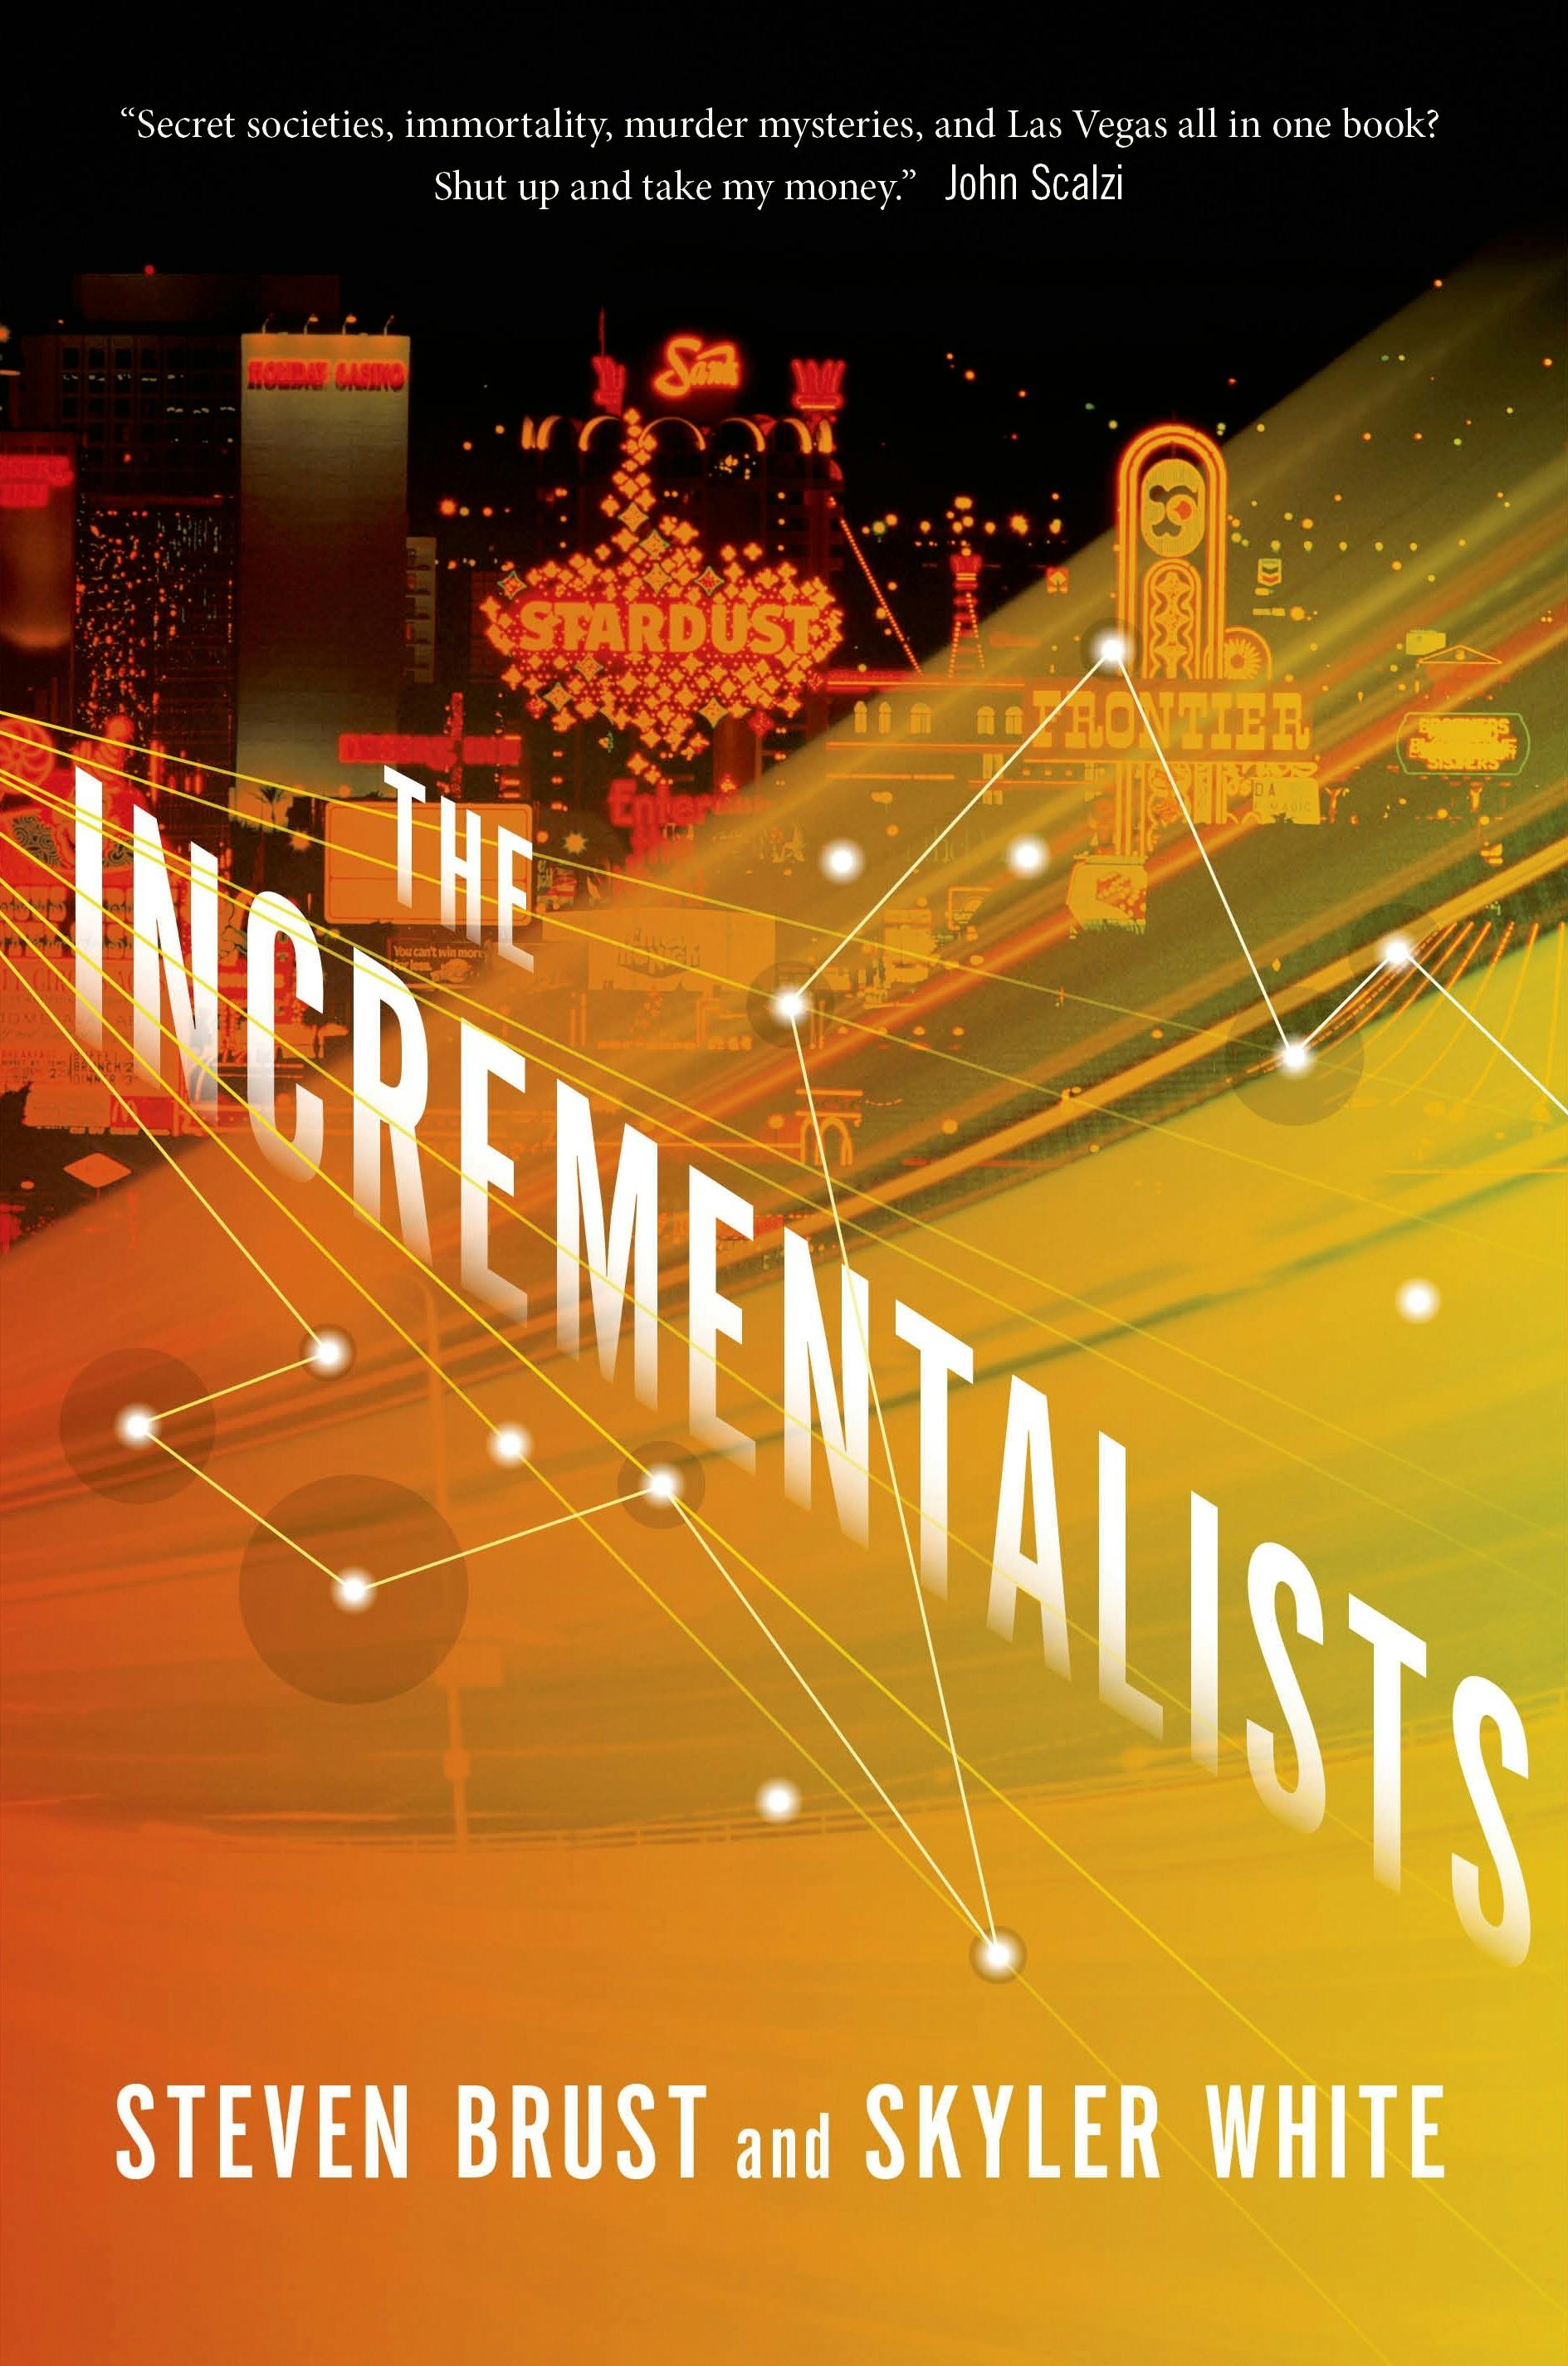 Cover for the book titled as: The Incrementalists